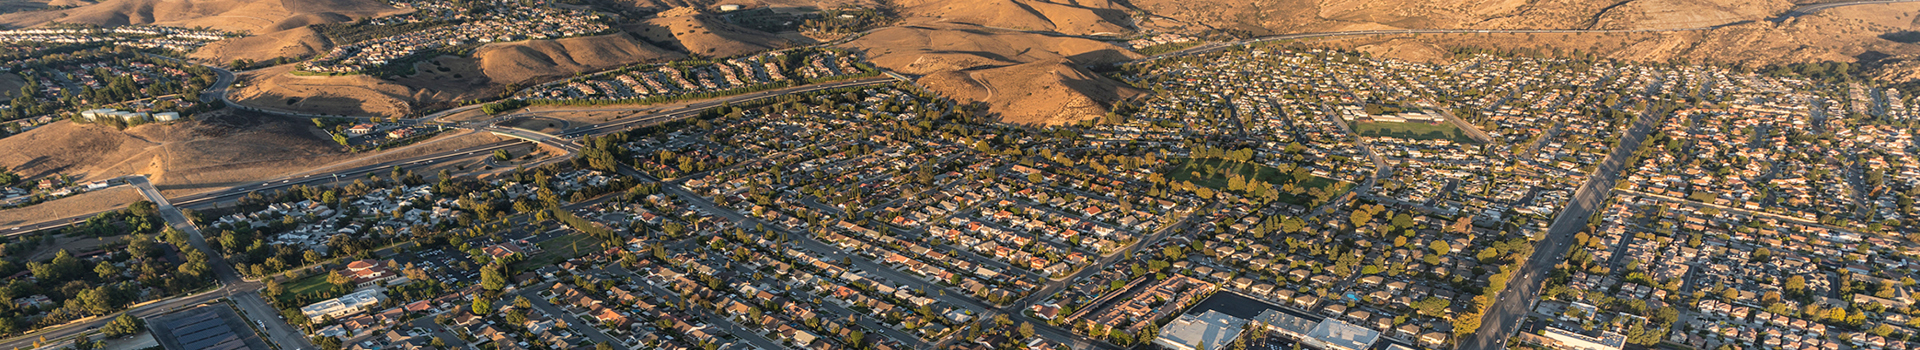 an aerial view of a housing development in Simi Valley